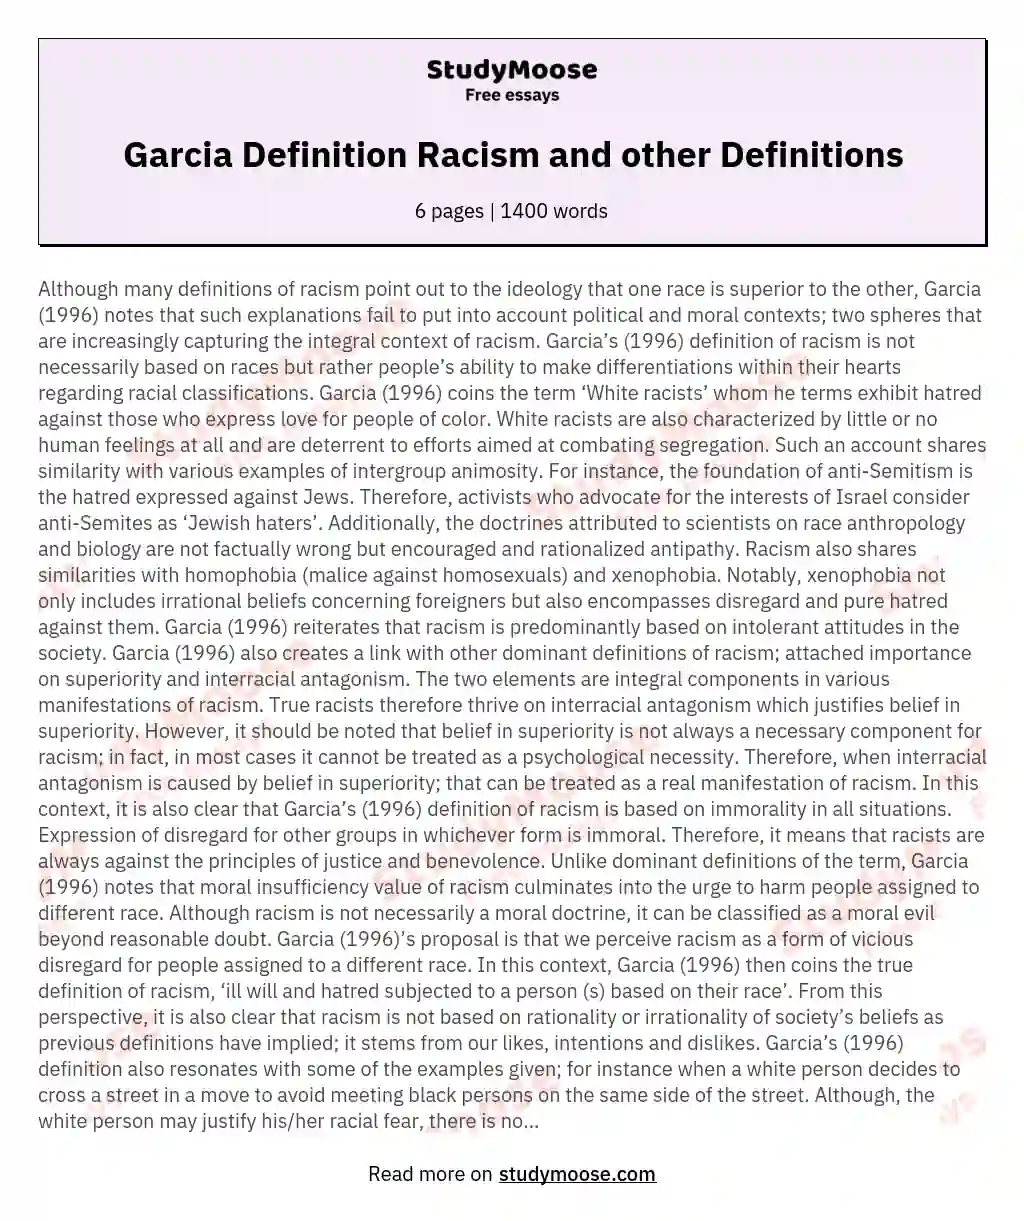 Garcia Definition Racism and other Definitions essay